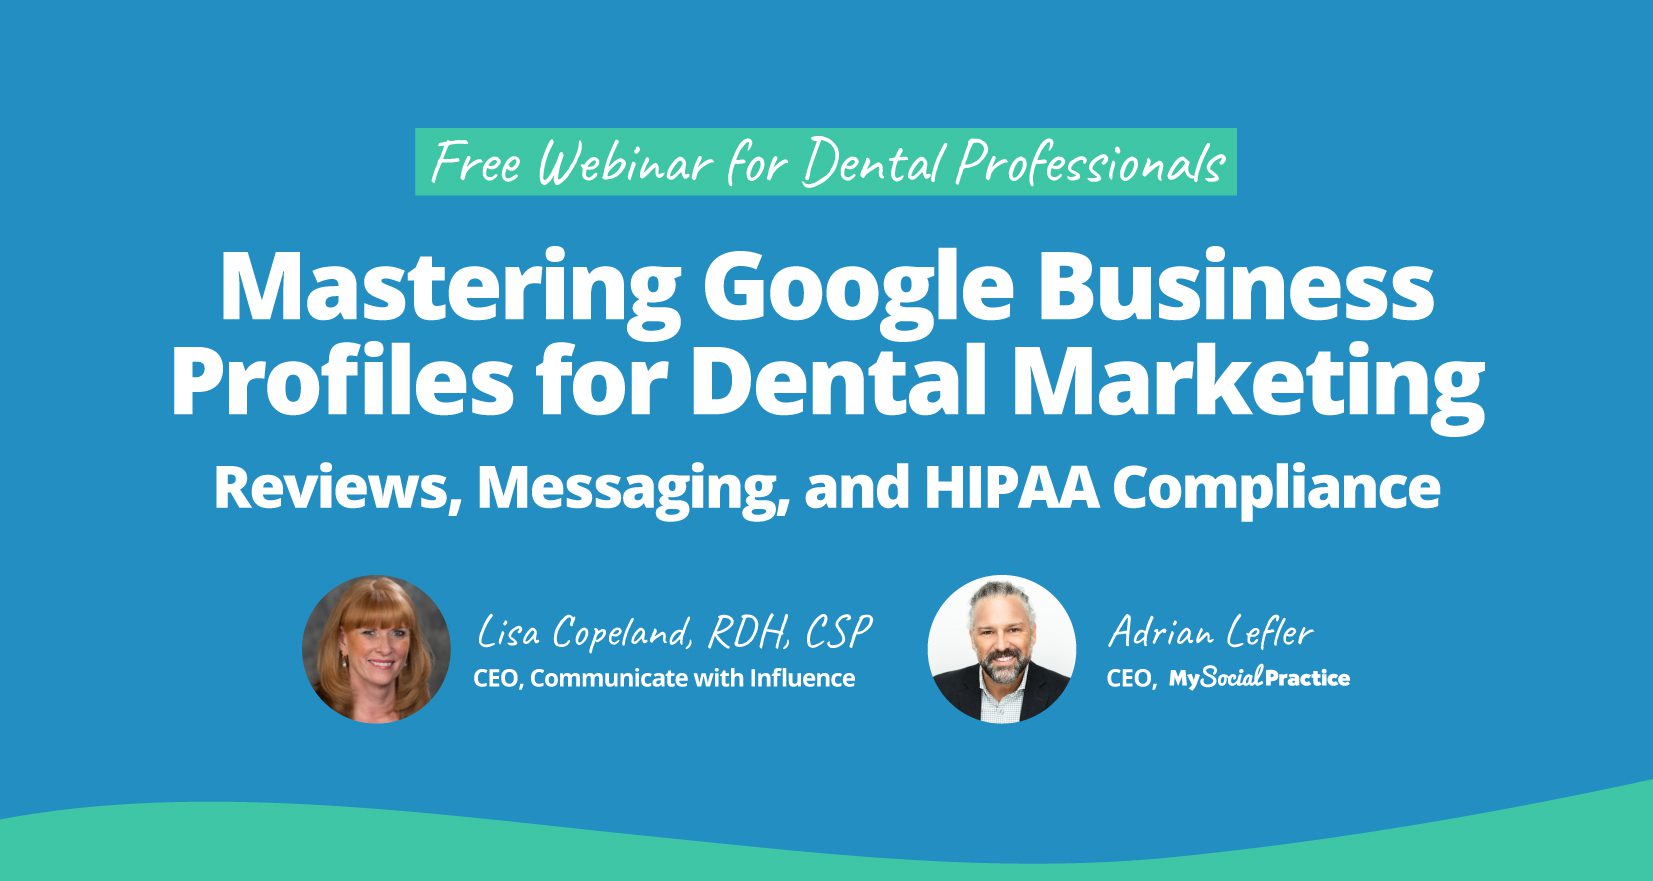 My Social Practice - Social Media Marketing for Dental & Dental Specialty Practices - how to get more dentist reviews